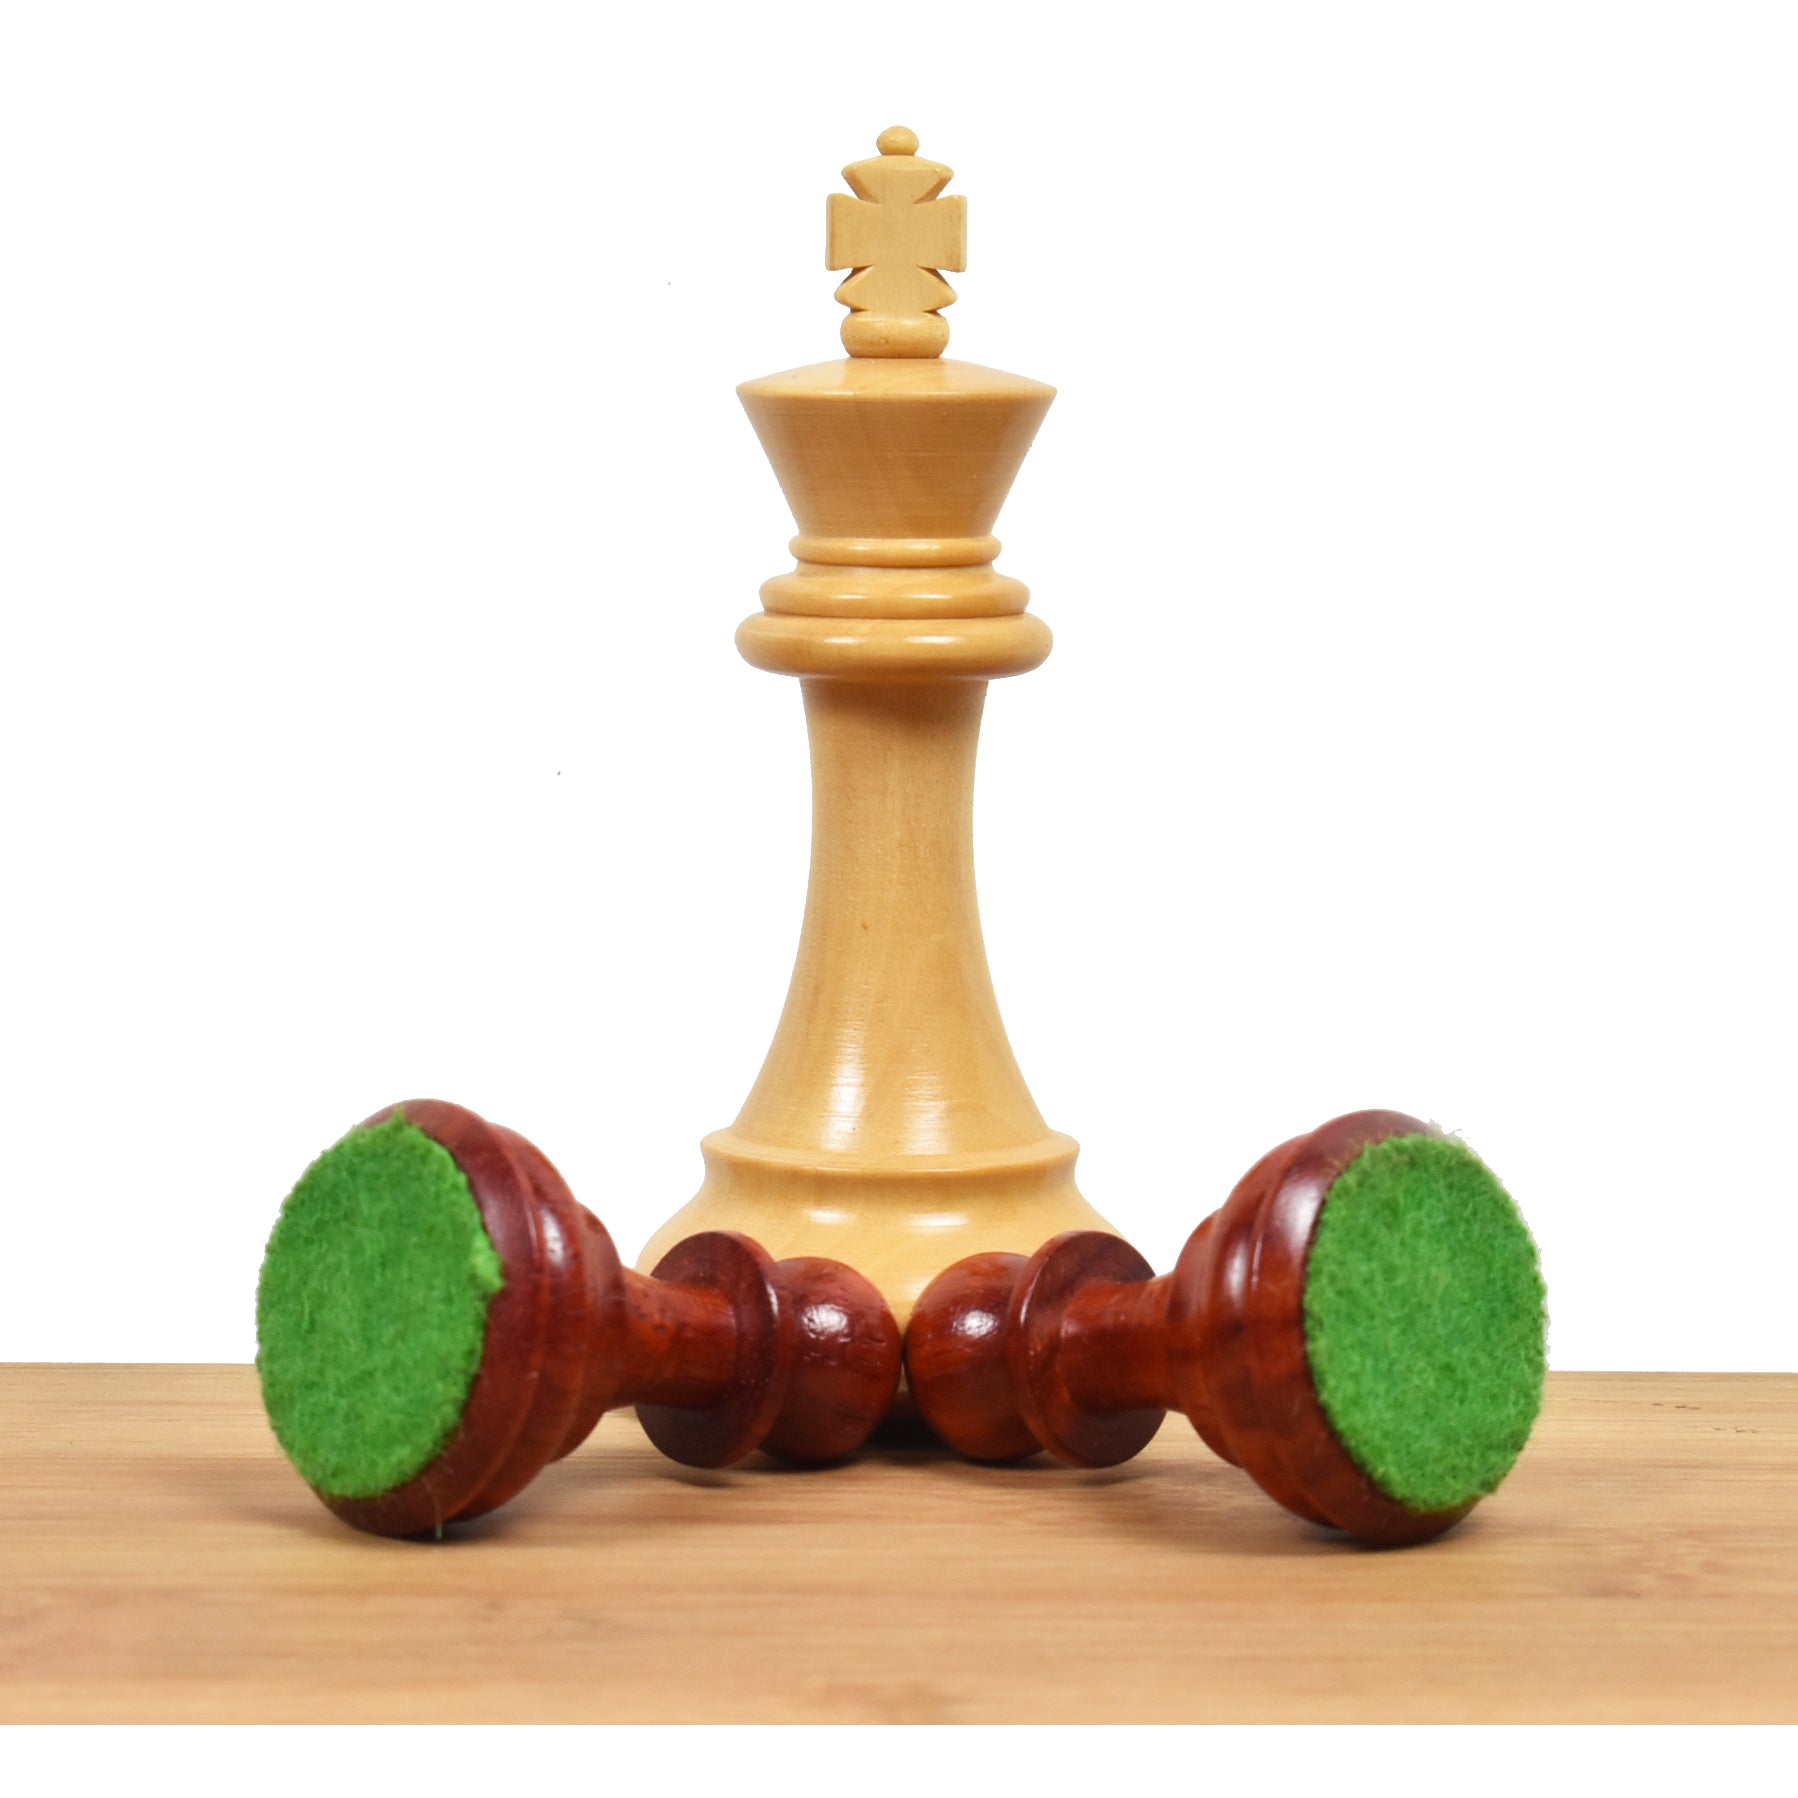 3.9" Exclusive Alban Staunton Chess Set Combo - Pieces in Bud Rosewood with Board and Box